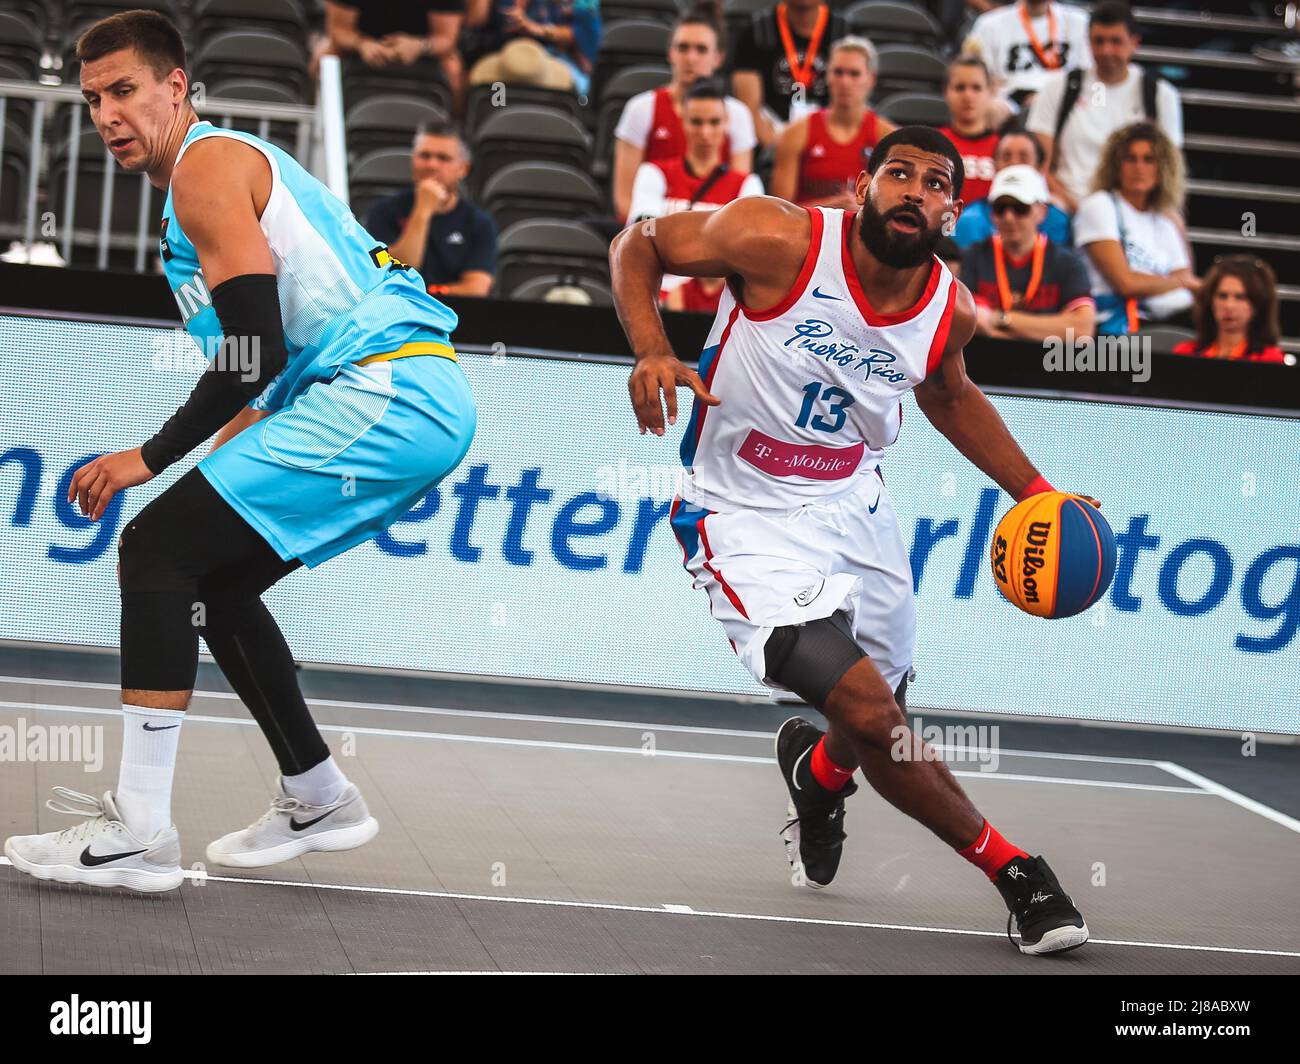 Amsterdam, Netherlands, June 18, 2019:Puerto Rican male player Angel Matias in action during the FIBA basketball 3x3 world cup Stock Photo